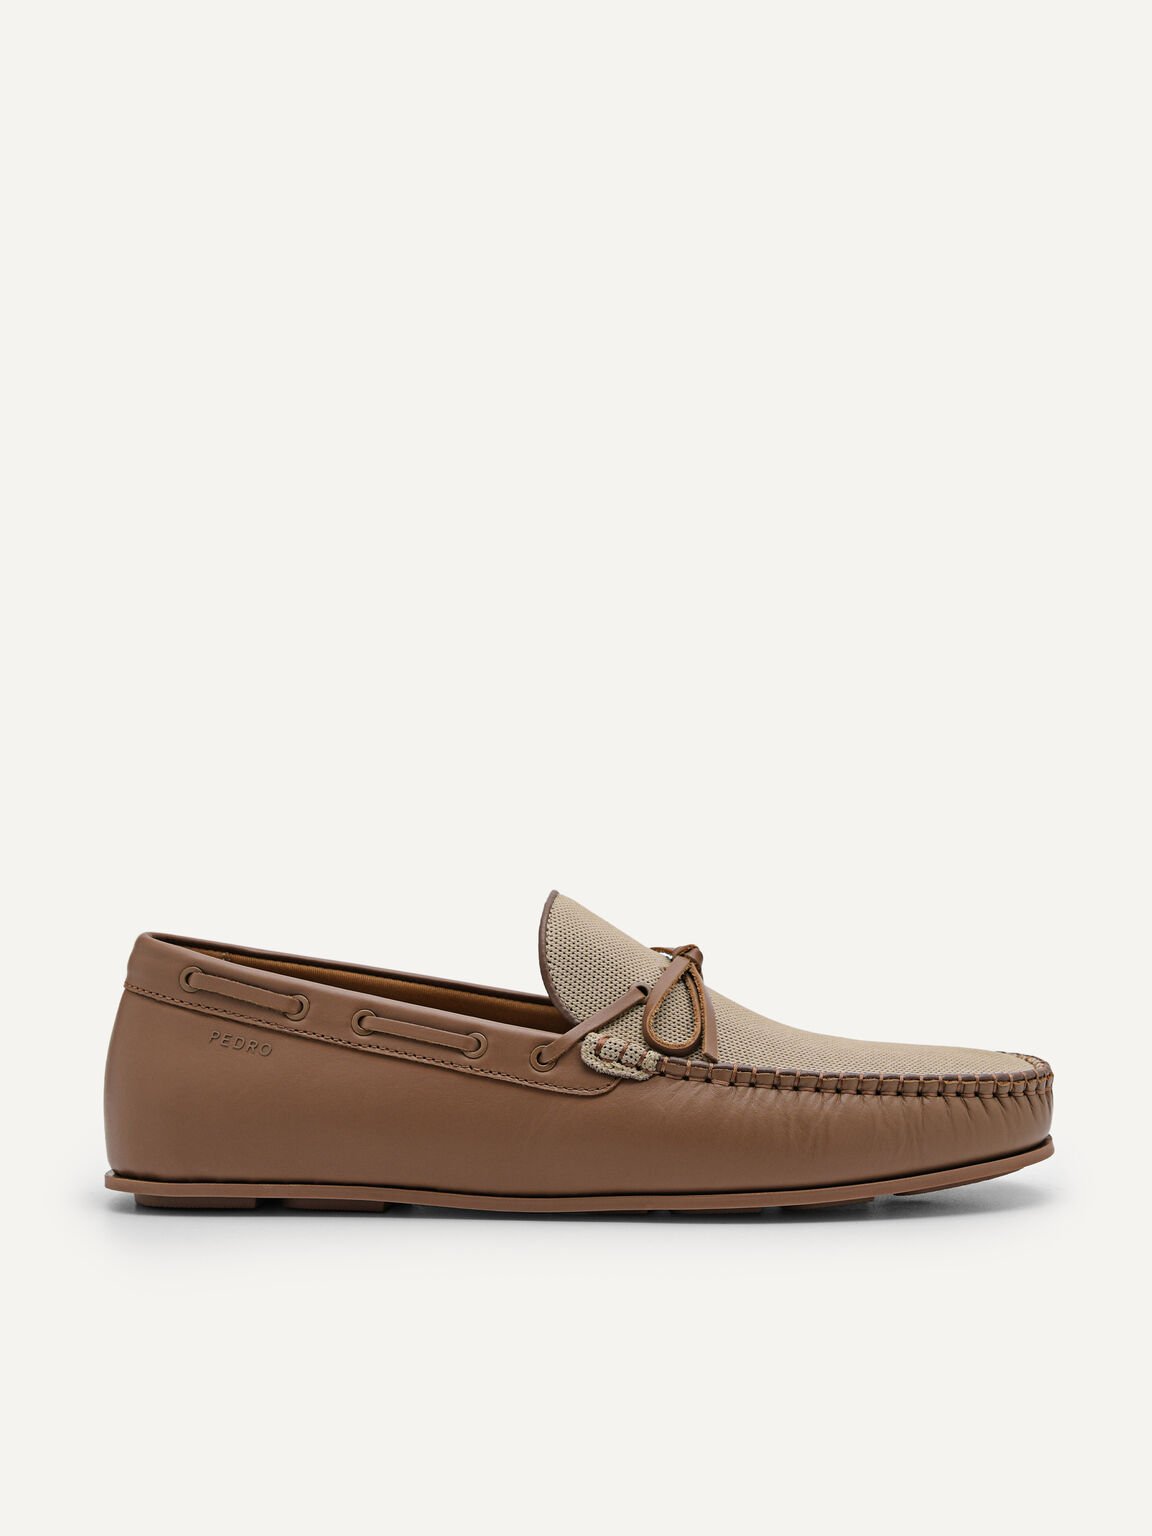 Leather Bow Moccasins, Camel